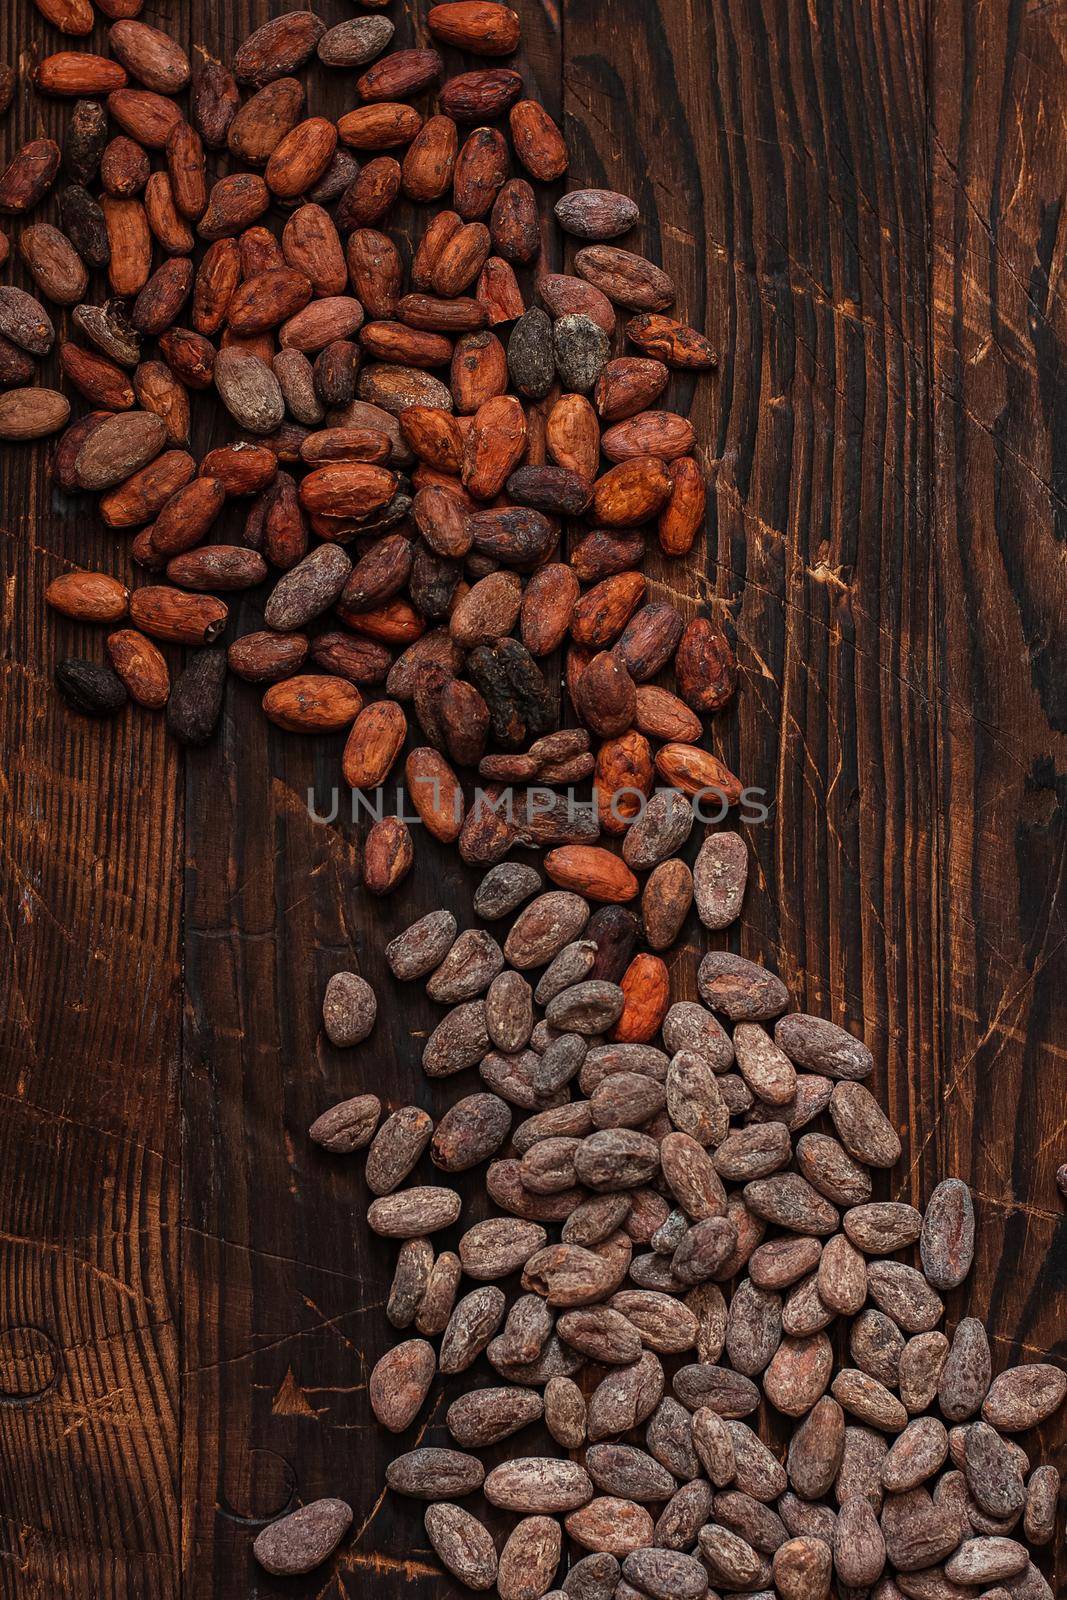 Raw cocoa beans two types Venezuela on brown background by mmp1206